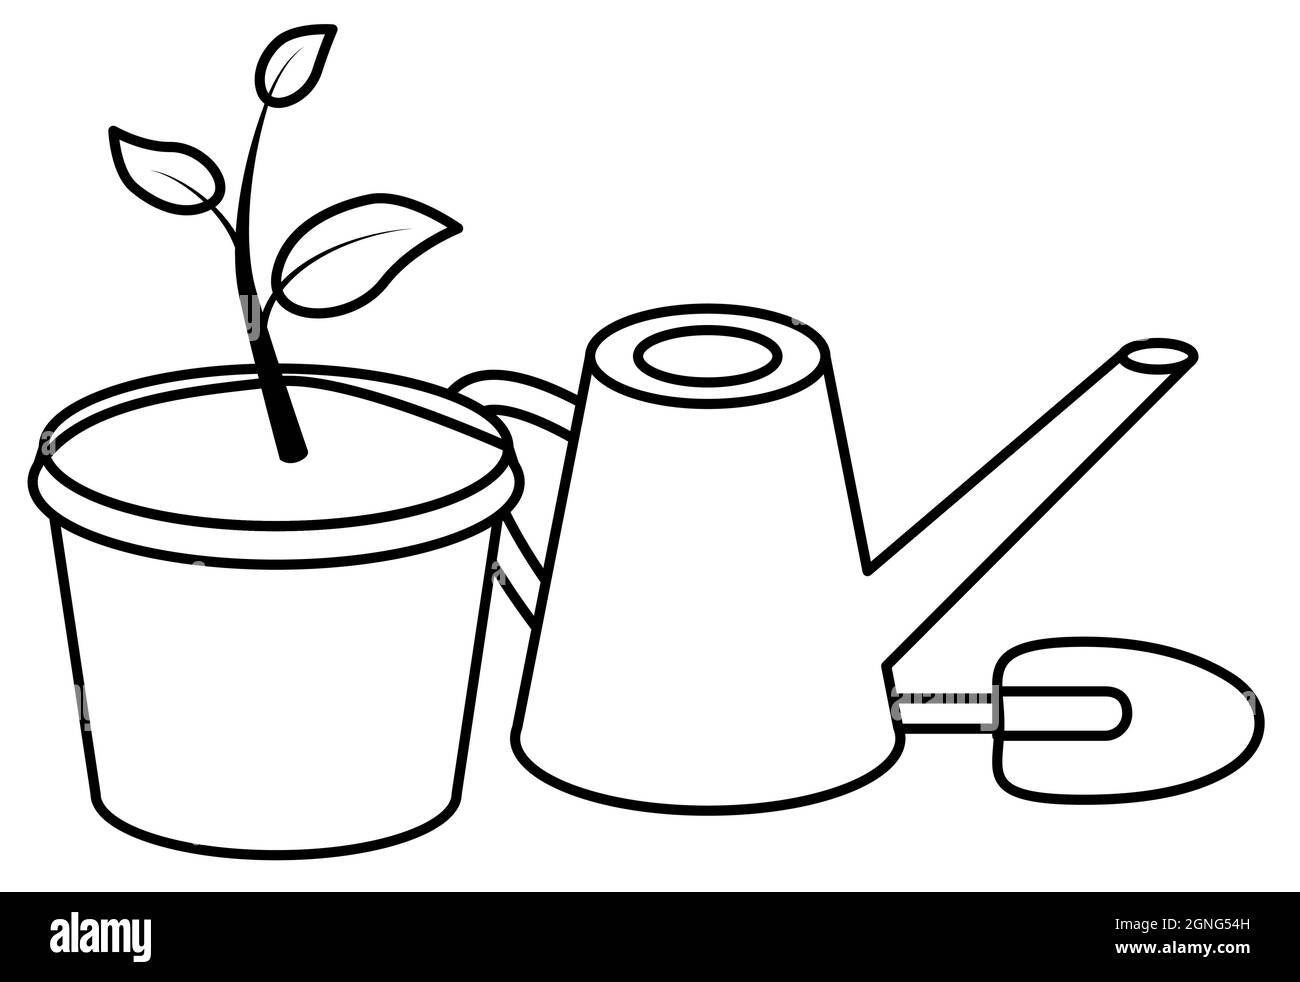 Seedling vector black line illustration of home plant in pot with watering can and small shovel isolated on white. Stock Vector